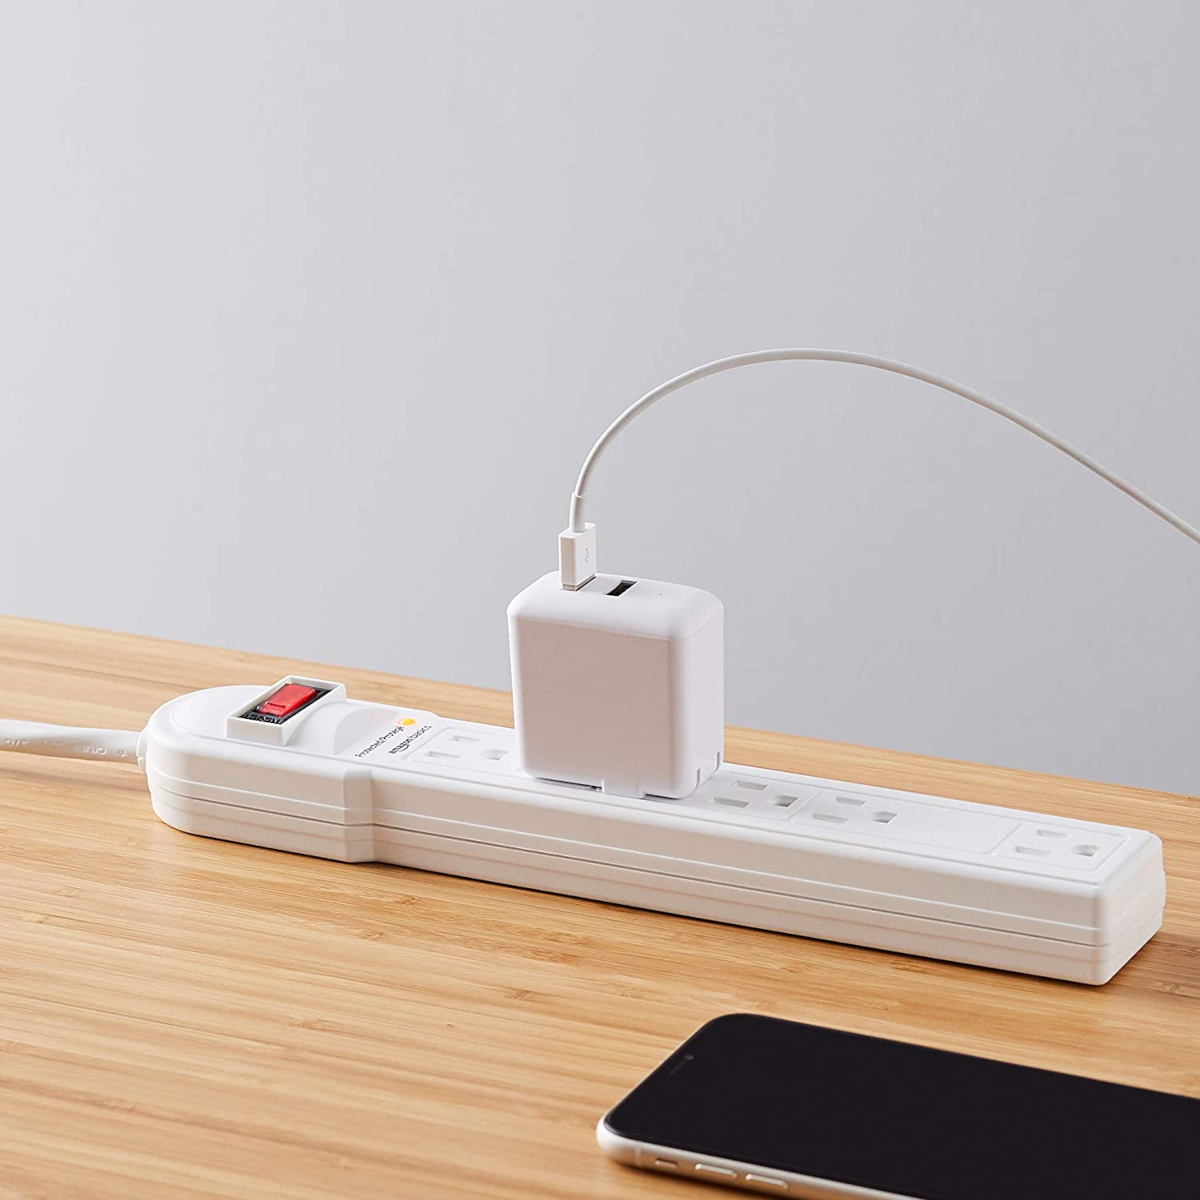 Product photo of an Amazon Basics surge protector with a phone charger plugged into it